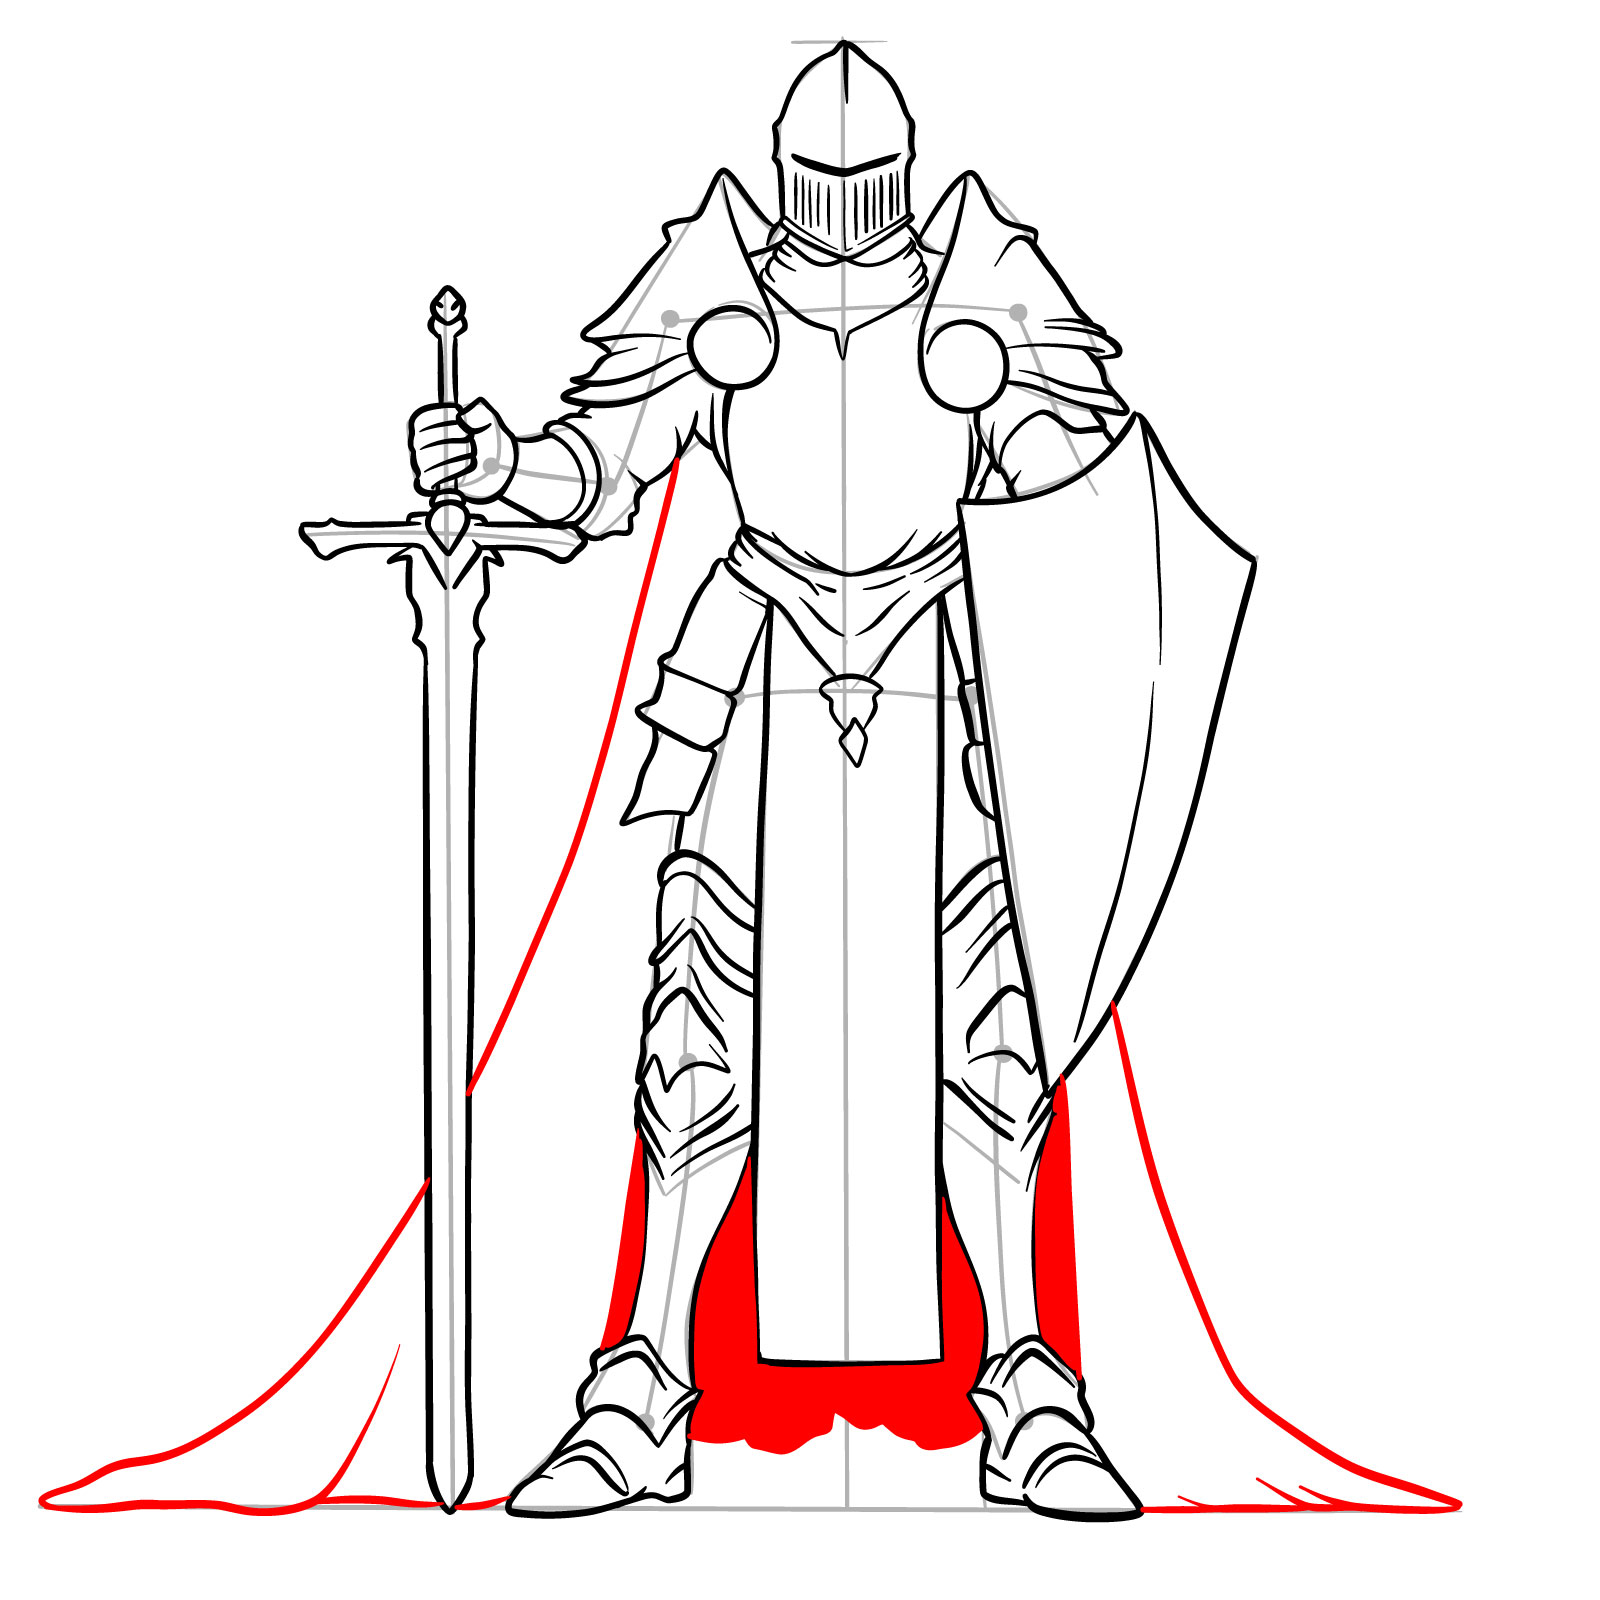 Male paladin in helmet step 20: adding a flowing cape